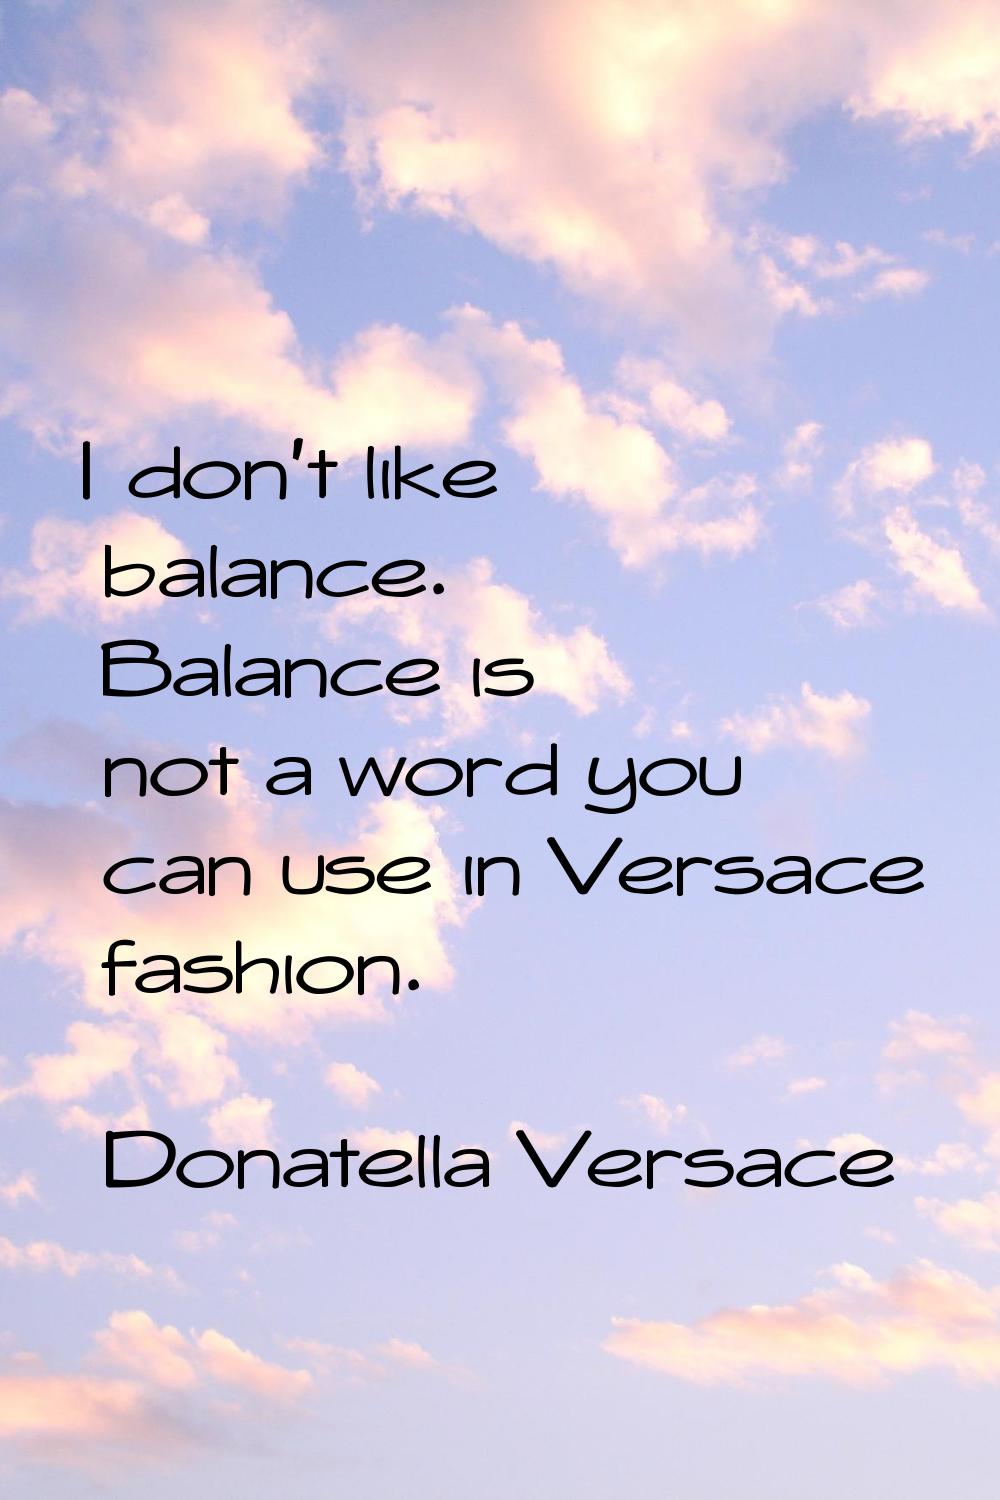 I don't like balance. Balance is not a word you can use in Versace fashion.